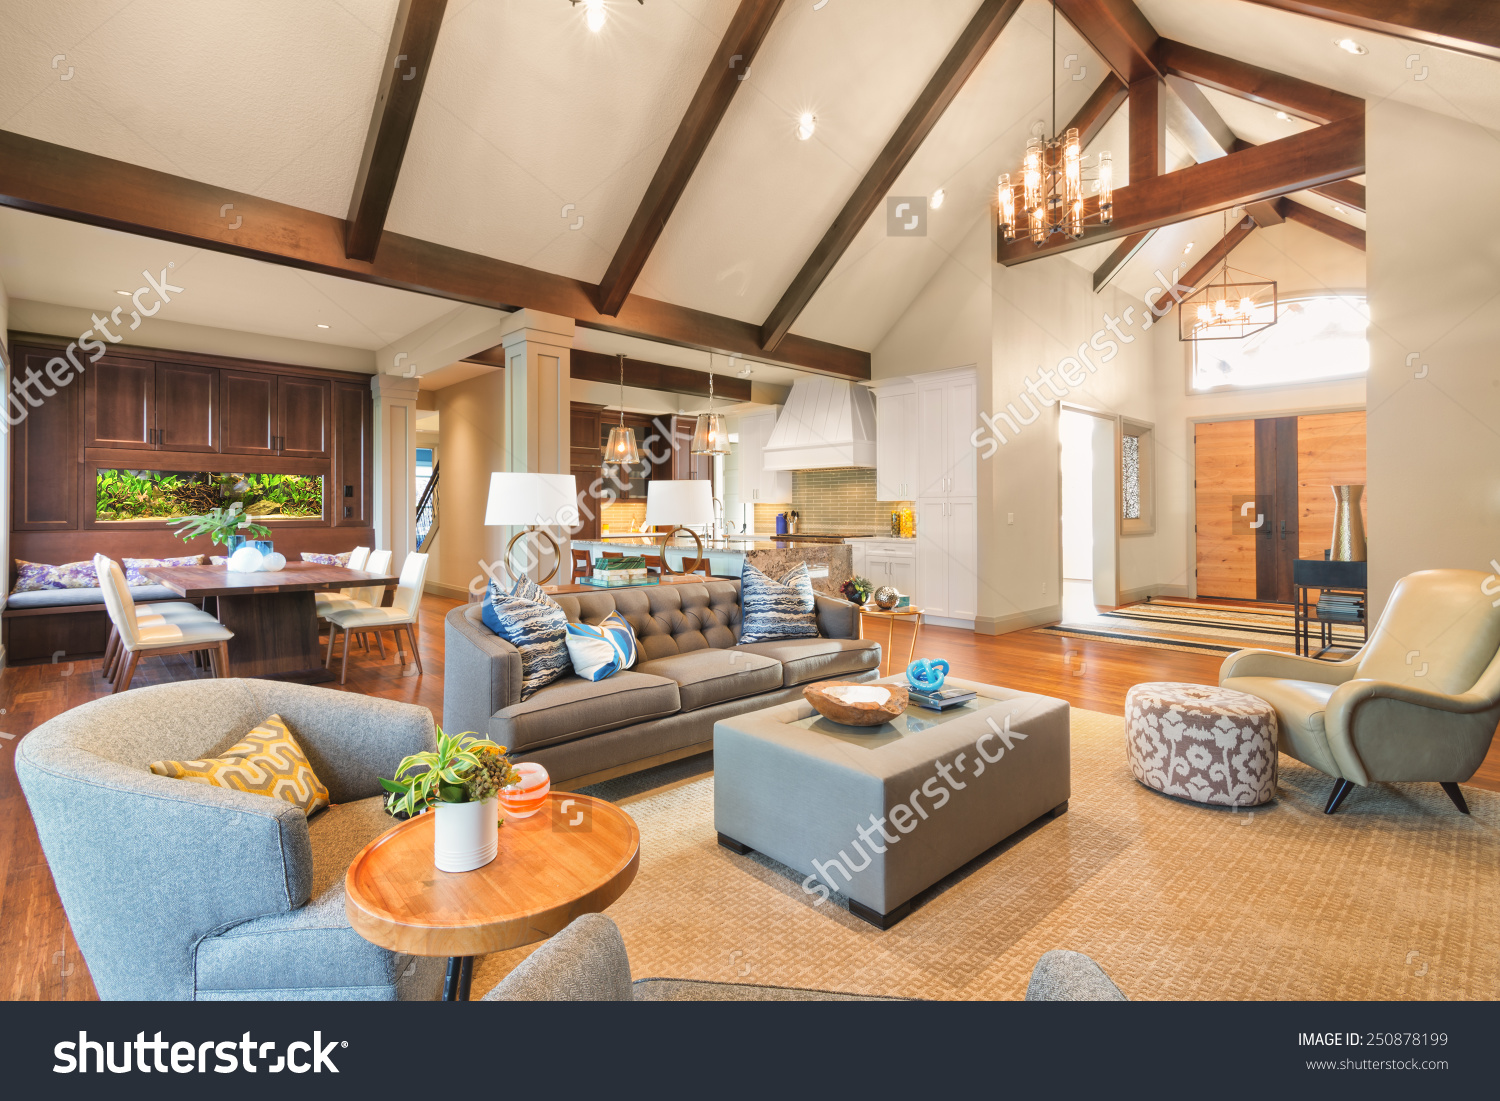 stock-photo-furnished-living-room-in-luxury-home-250878199